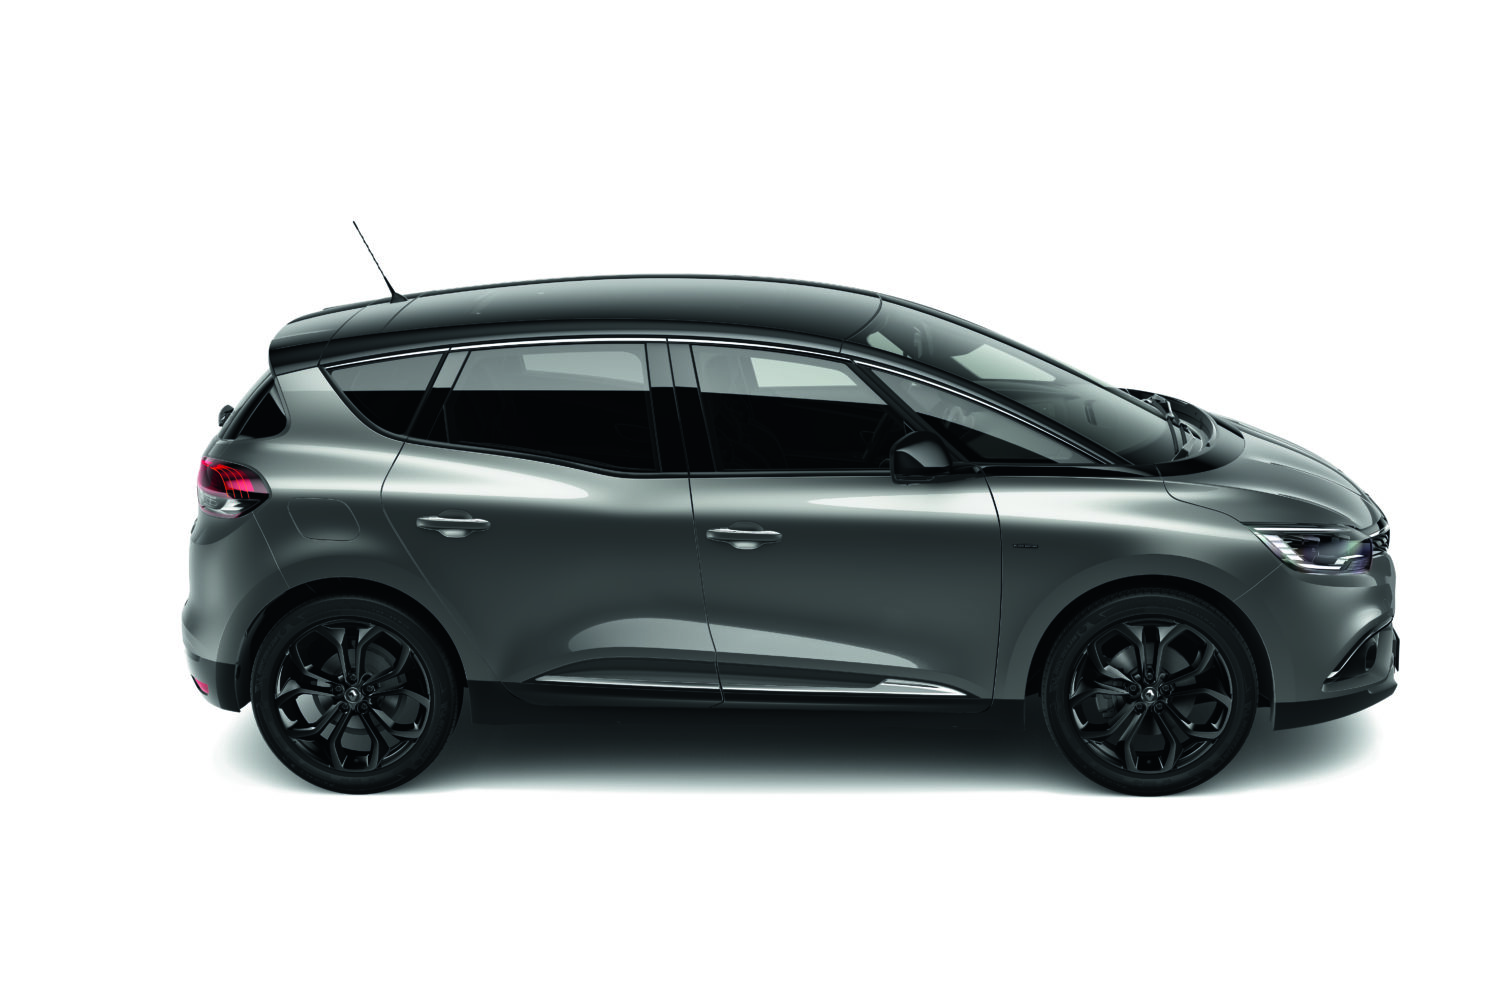 2019 - Renault SCENIC Black Edition Limited Edition